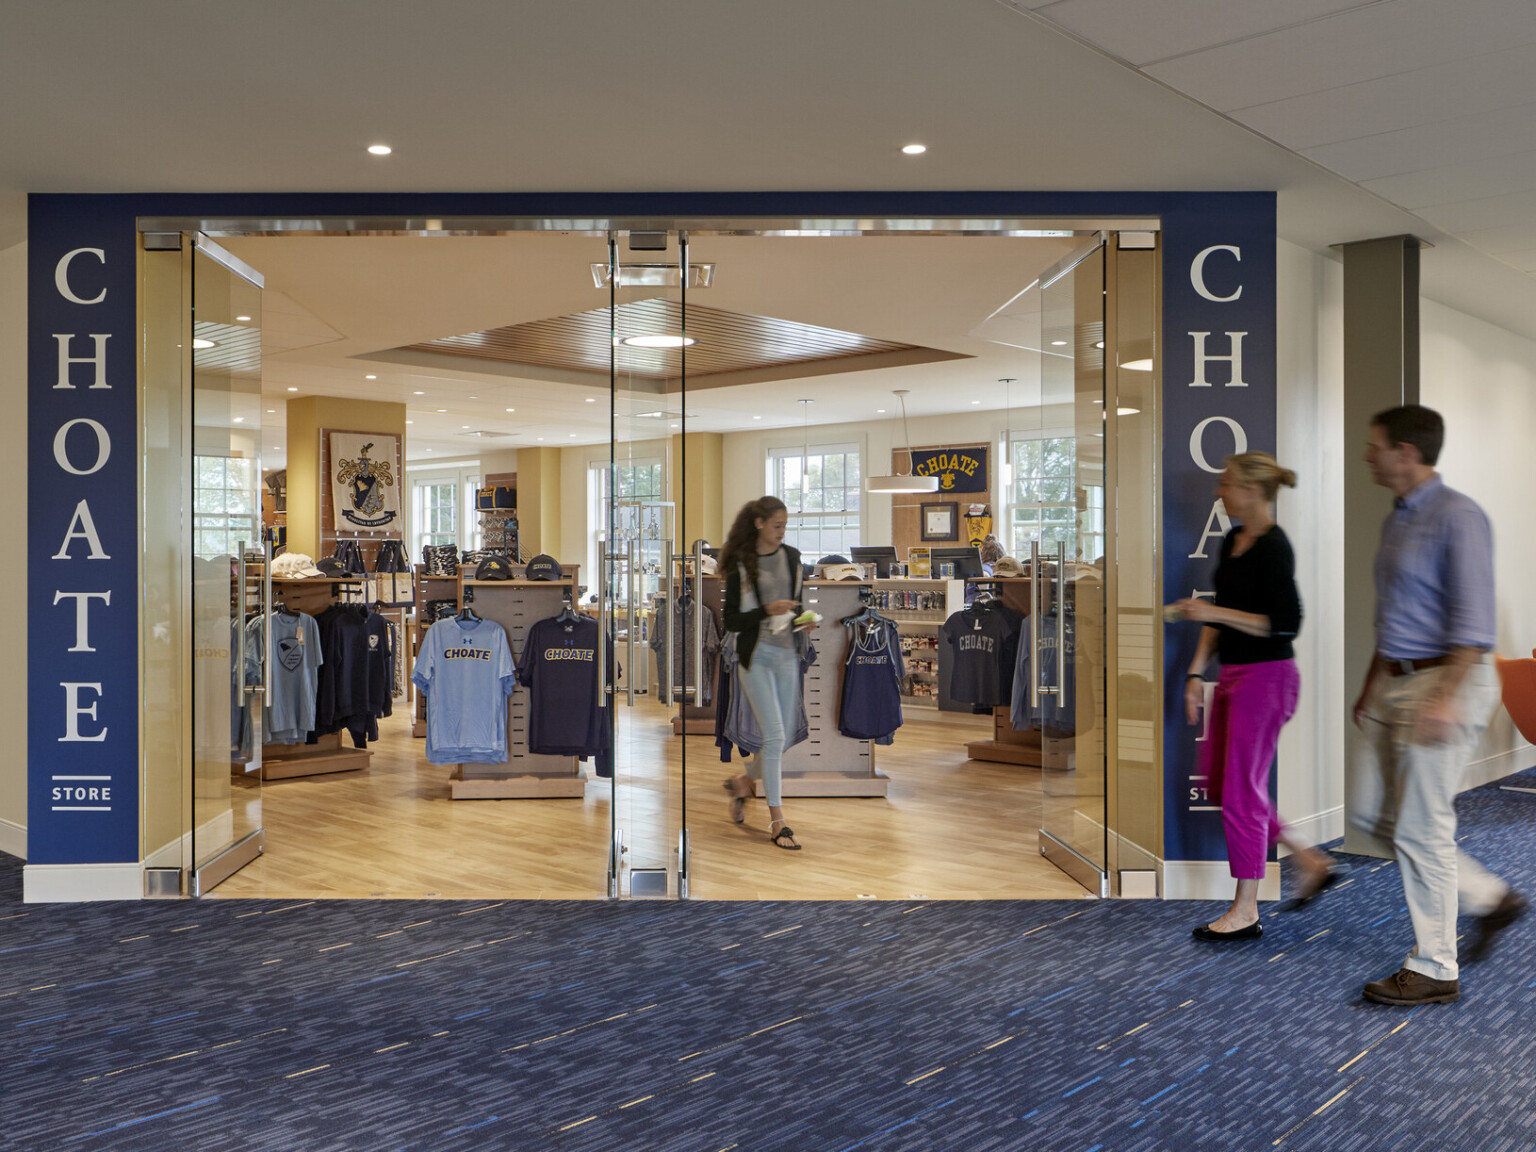 Choate student store with blue school branding with wood flooring off blue carpeted hall, large windows in both spaces